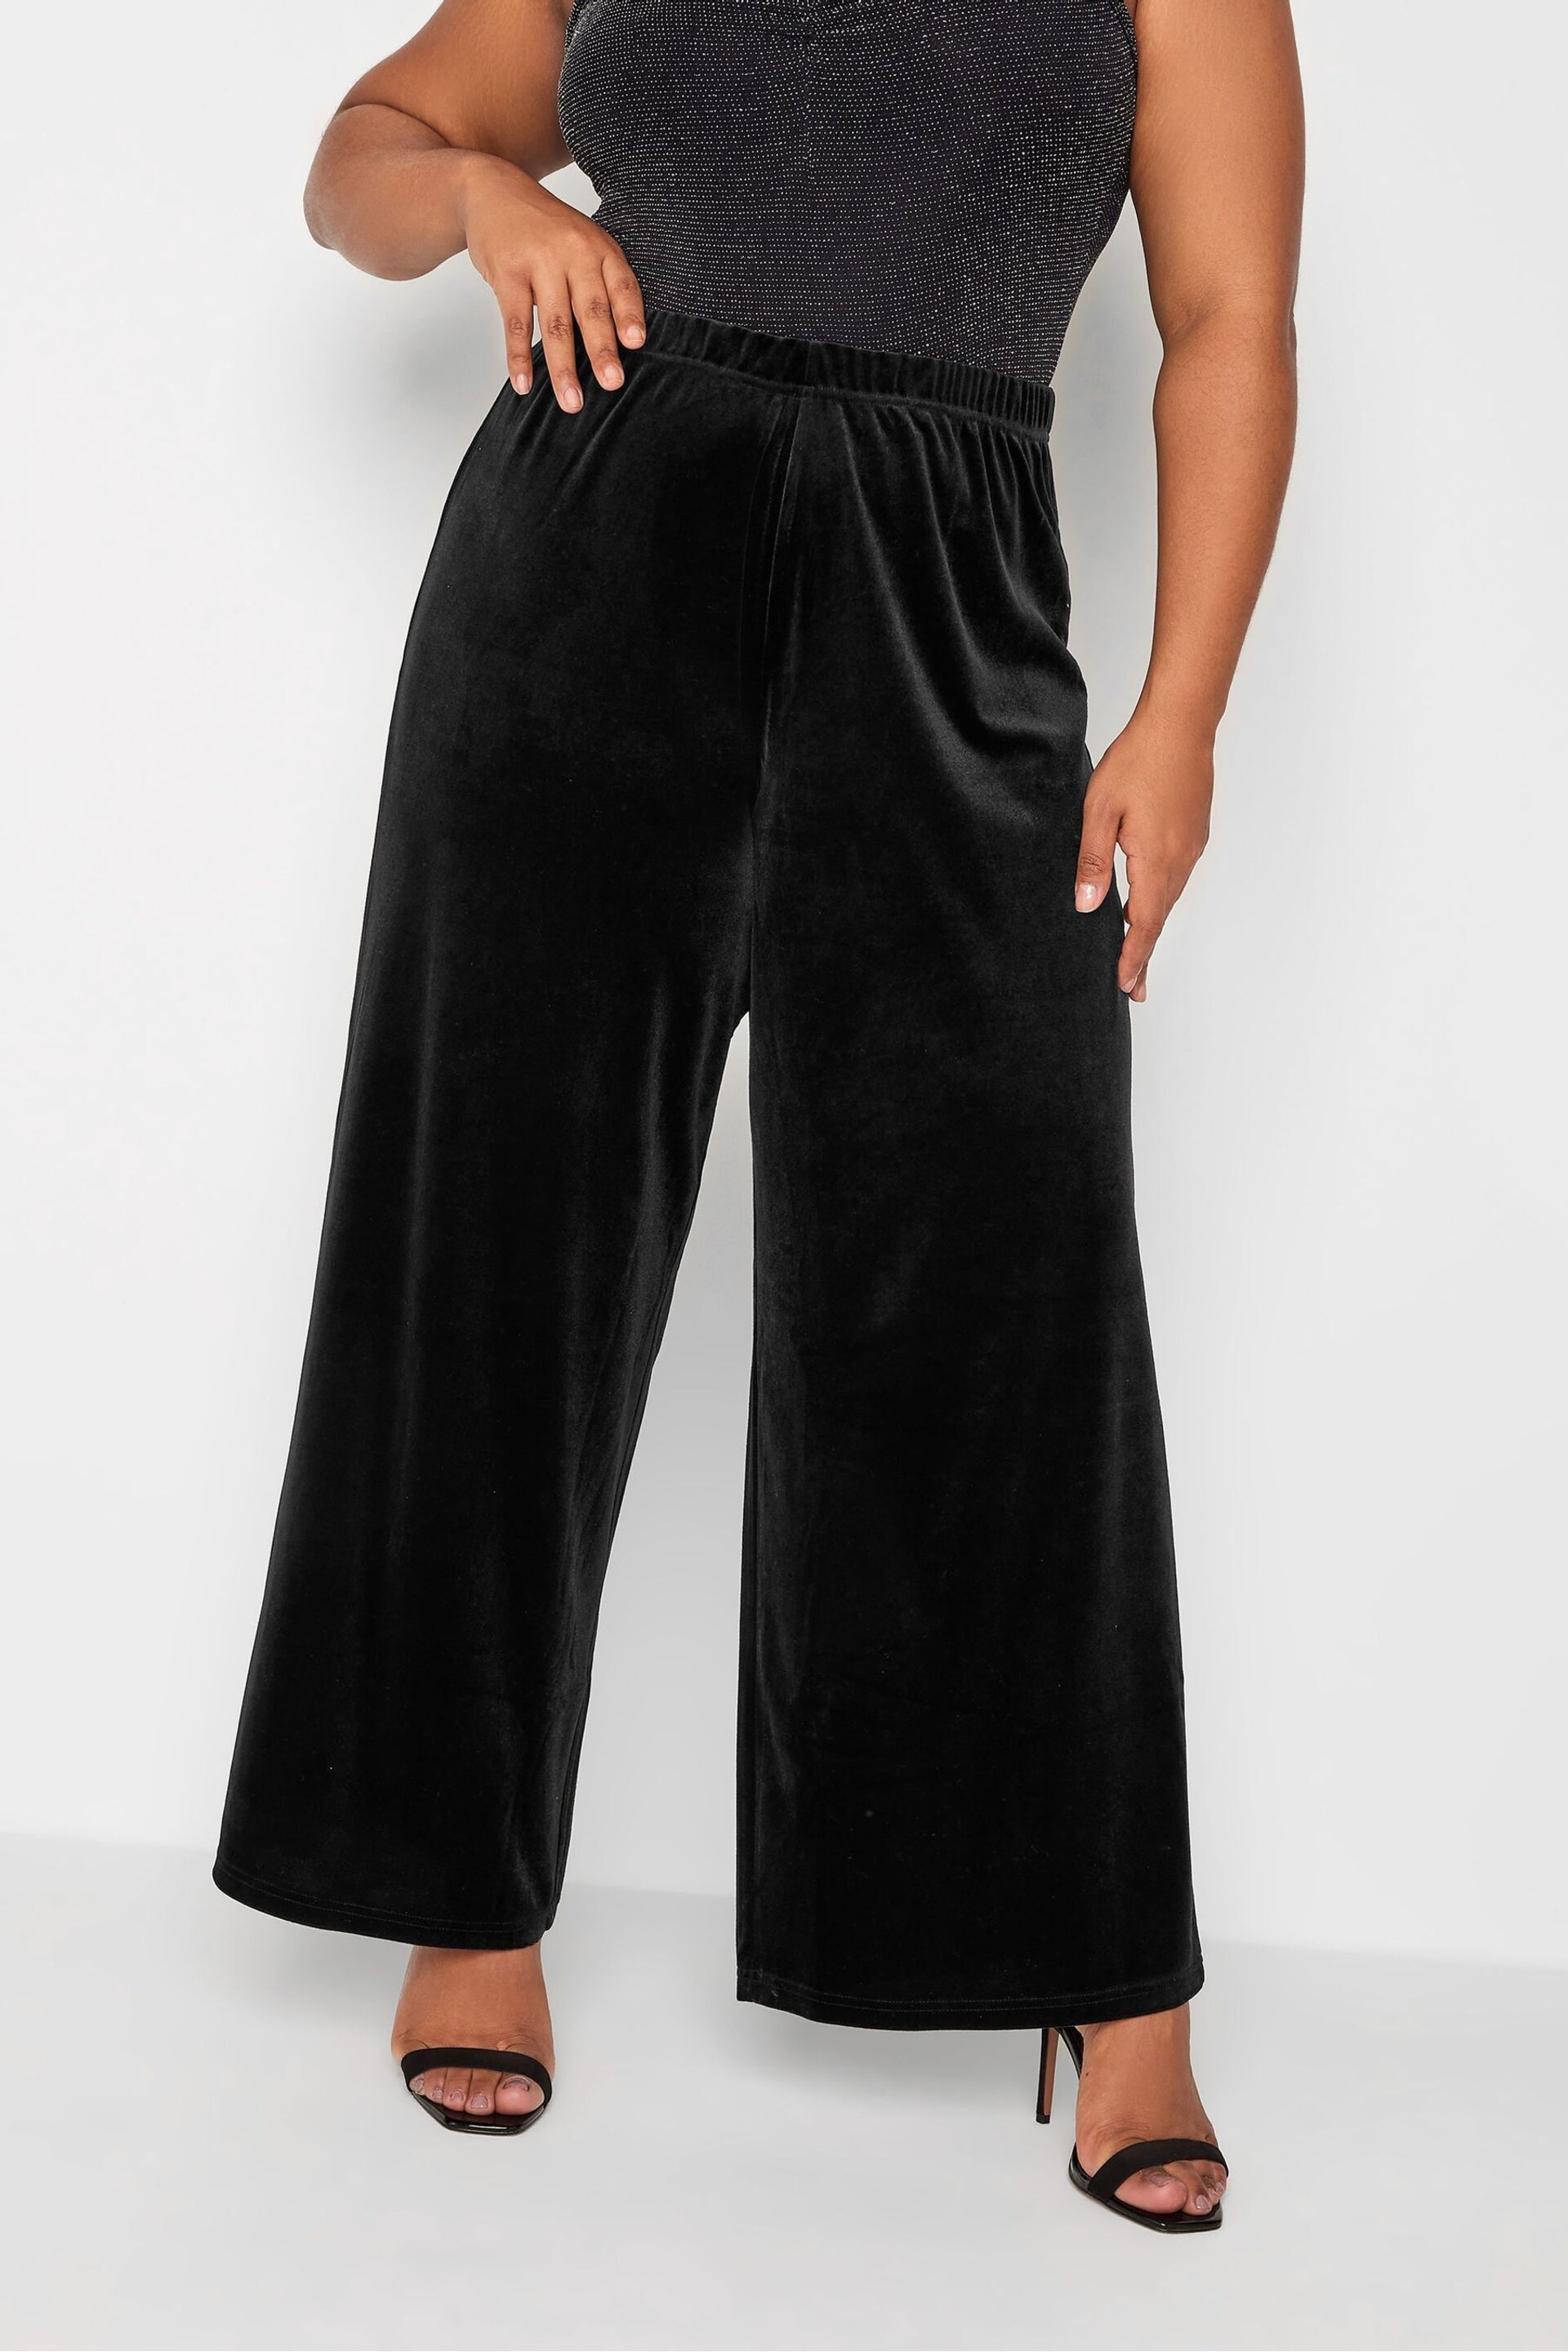 Yours Curve Black Wide Leg Velvet Trousers - Image 1 of 4